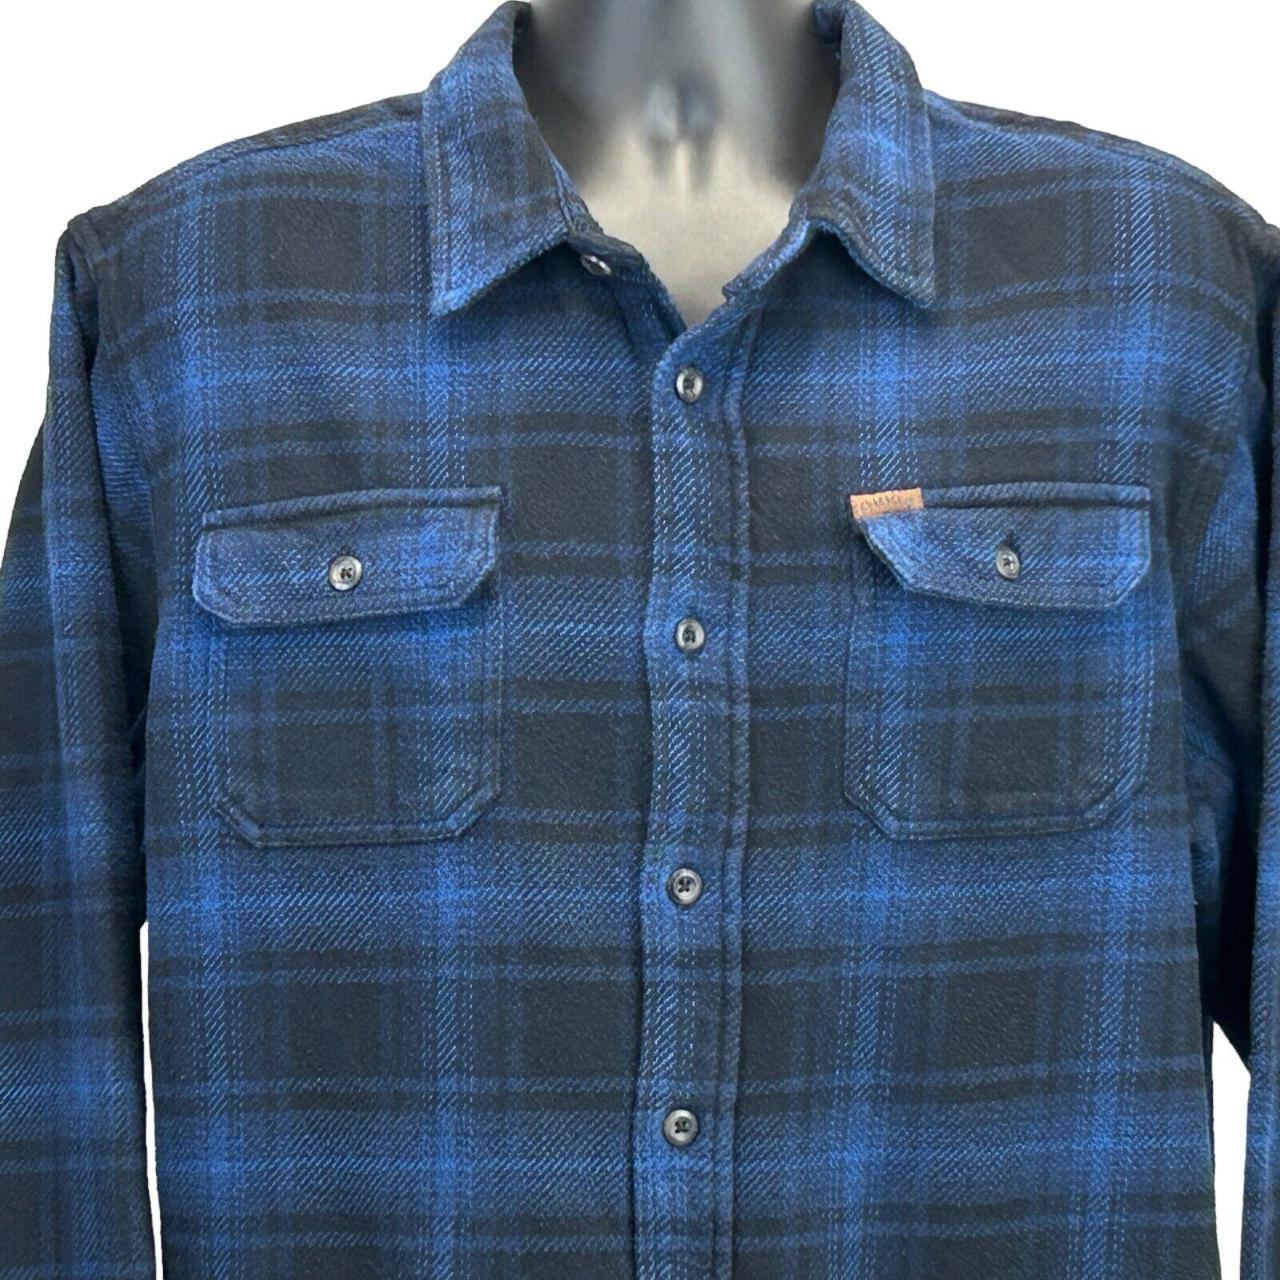 Costco Orvis Thick Flannel With Pockets (Medium)